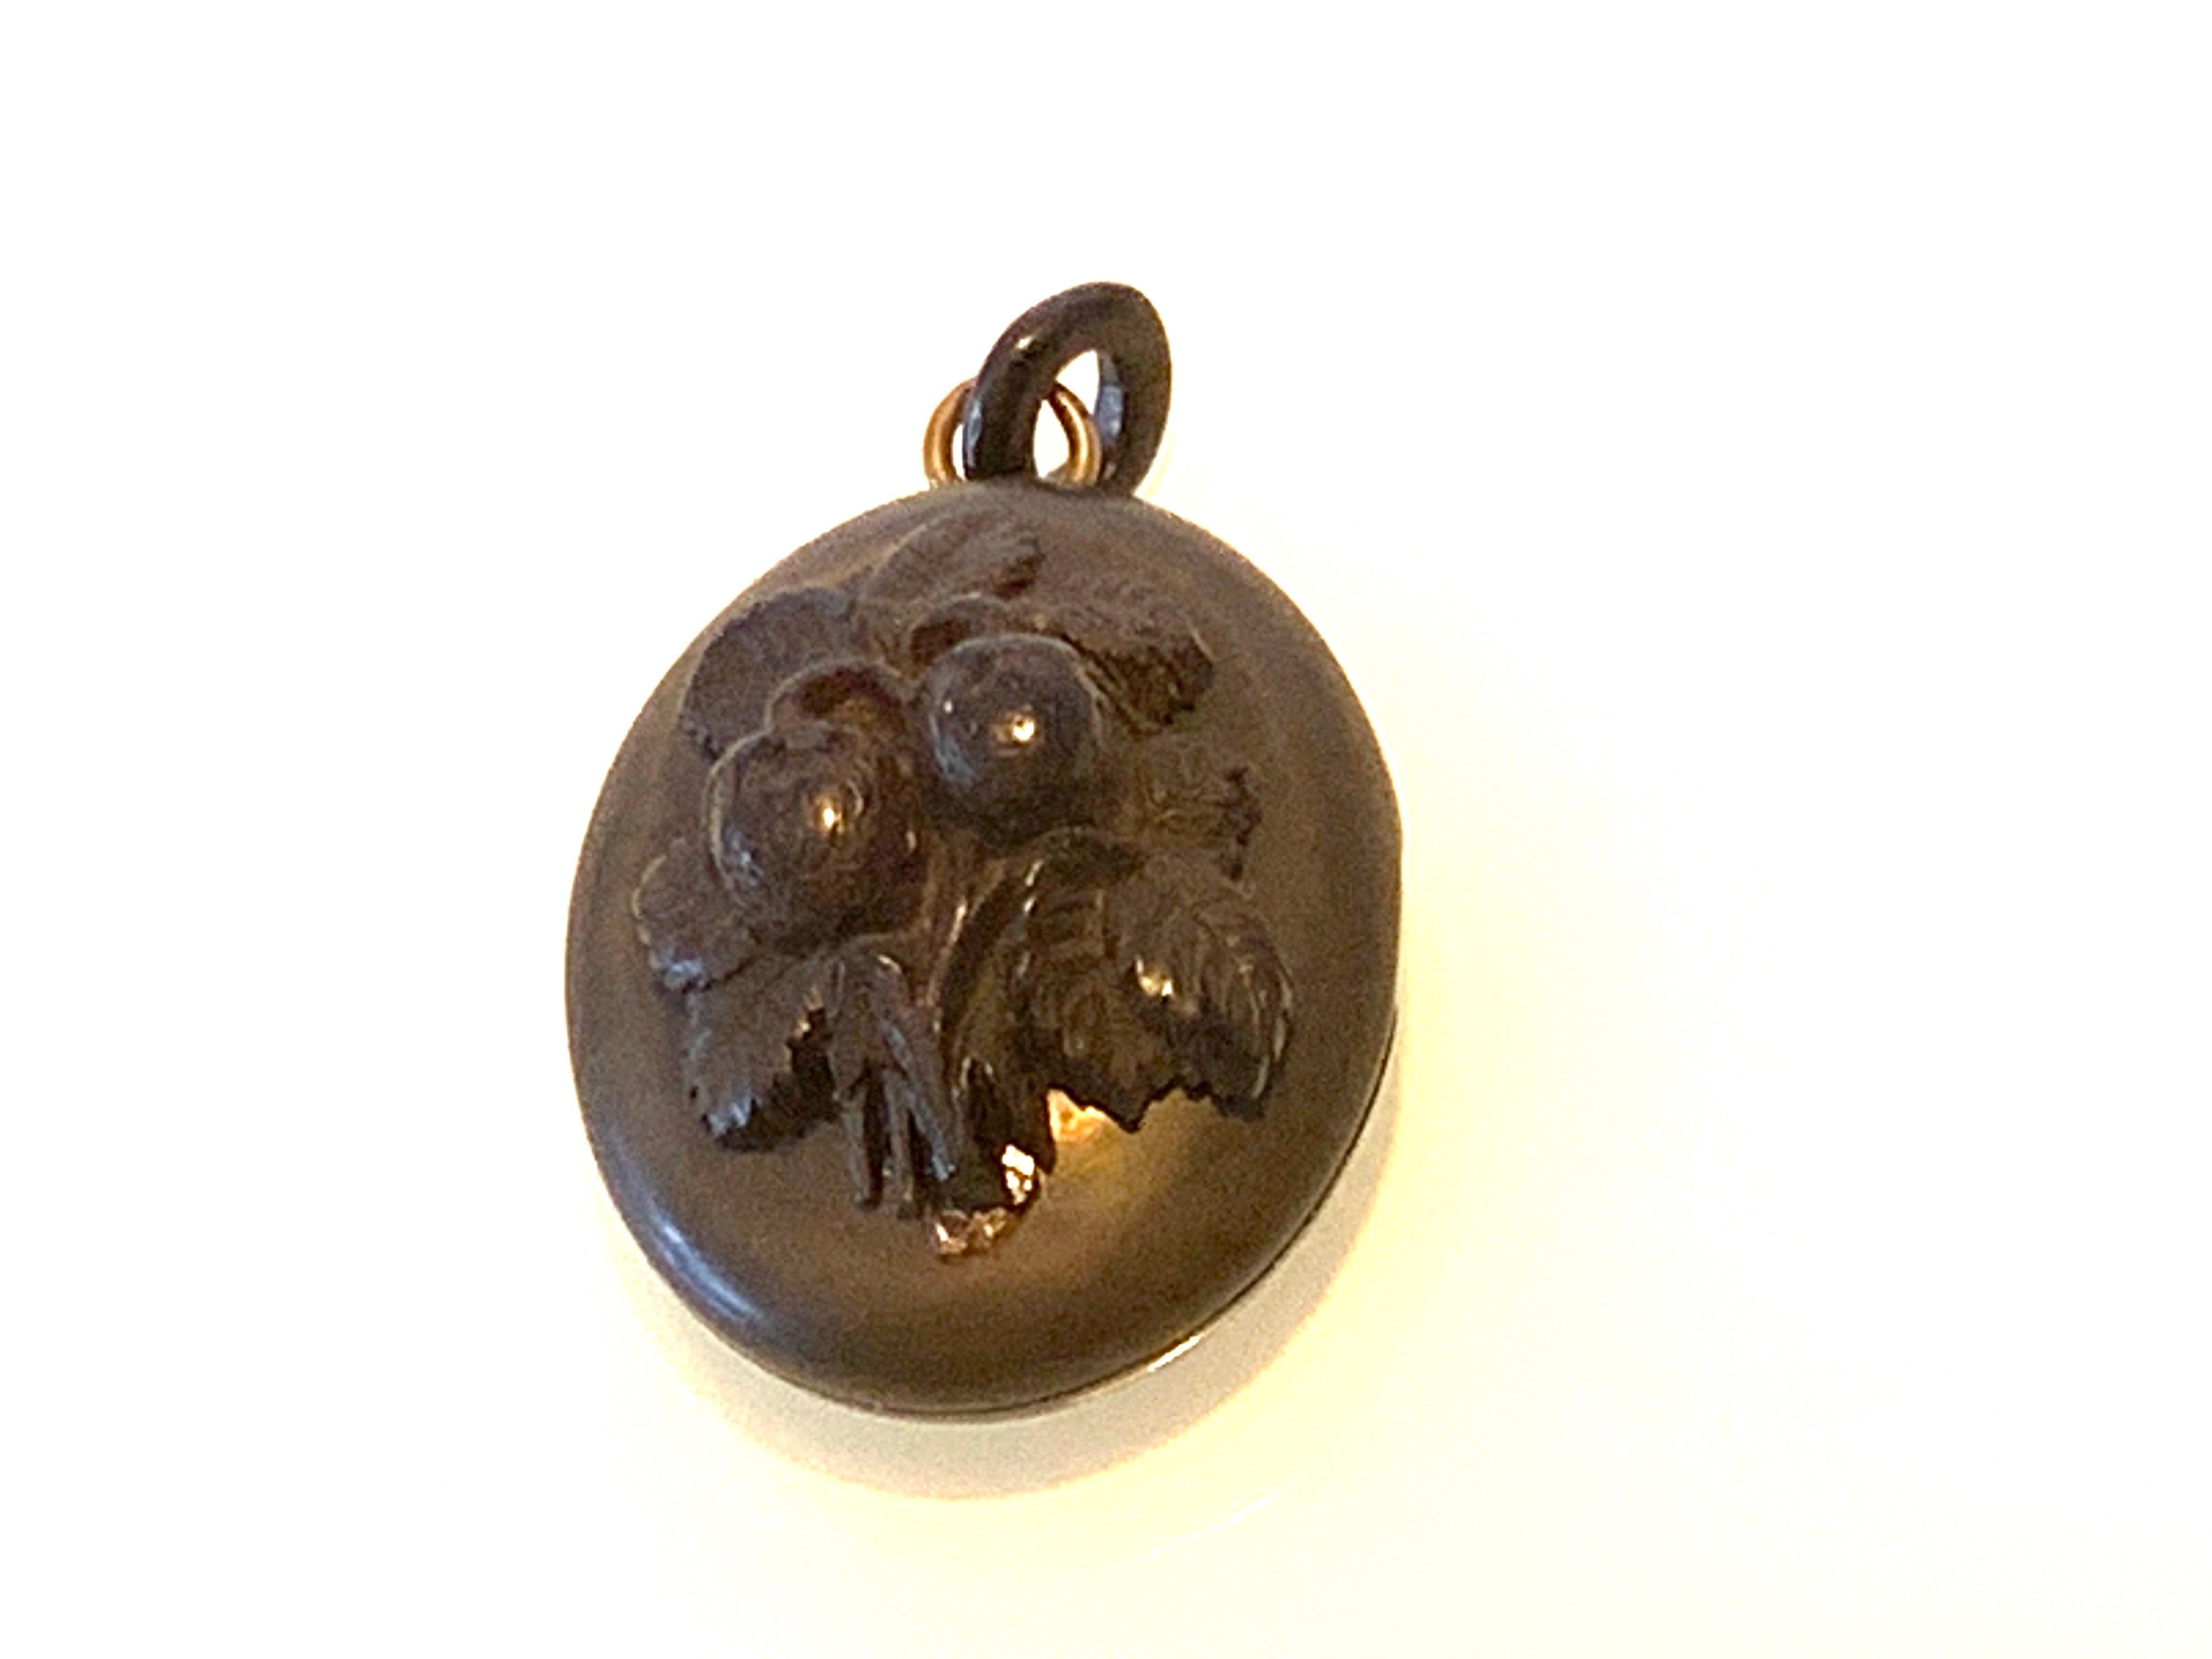 Rare Beautiful Victorian Vulcanite Mourning Locket
which has a missing top half of side hinge cover missing - and therefore comes apart as two sections 
But saying this the two pieces cleverly snap together and are extremely secure
and the issue